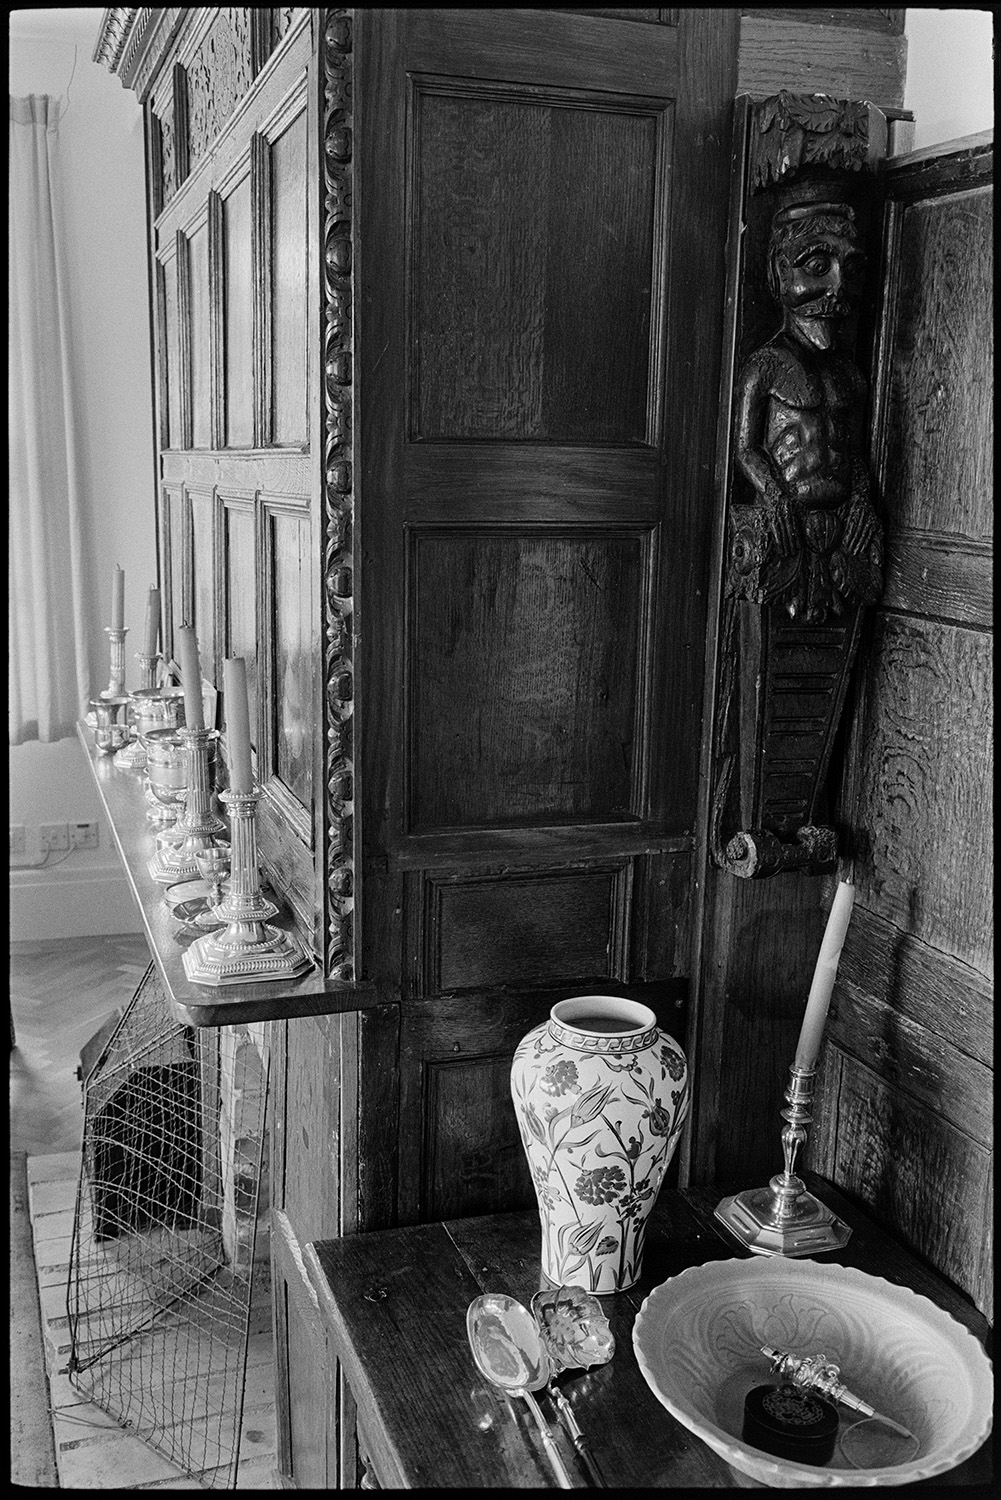 House interior with furniture, paintings, harpsichord, panelled screen, china.
[Interior of a room in a house in Dolton belonging to Michael Davis, showing a wood panelled wall with carving, candlesticks and a china vase.]